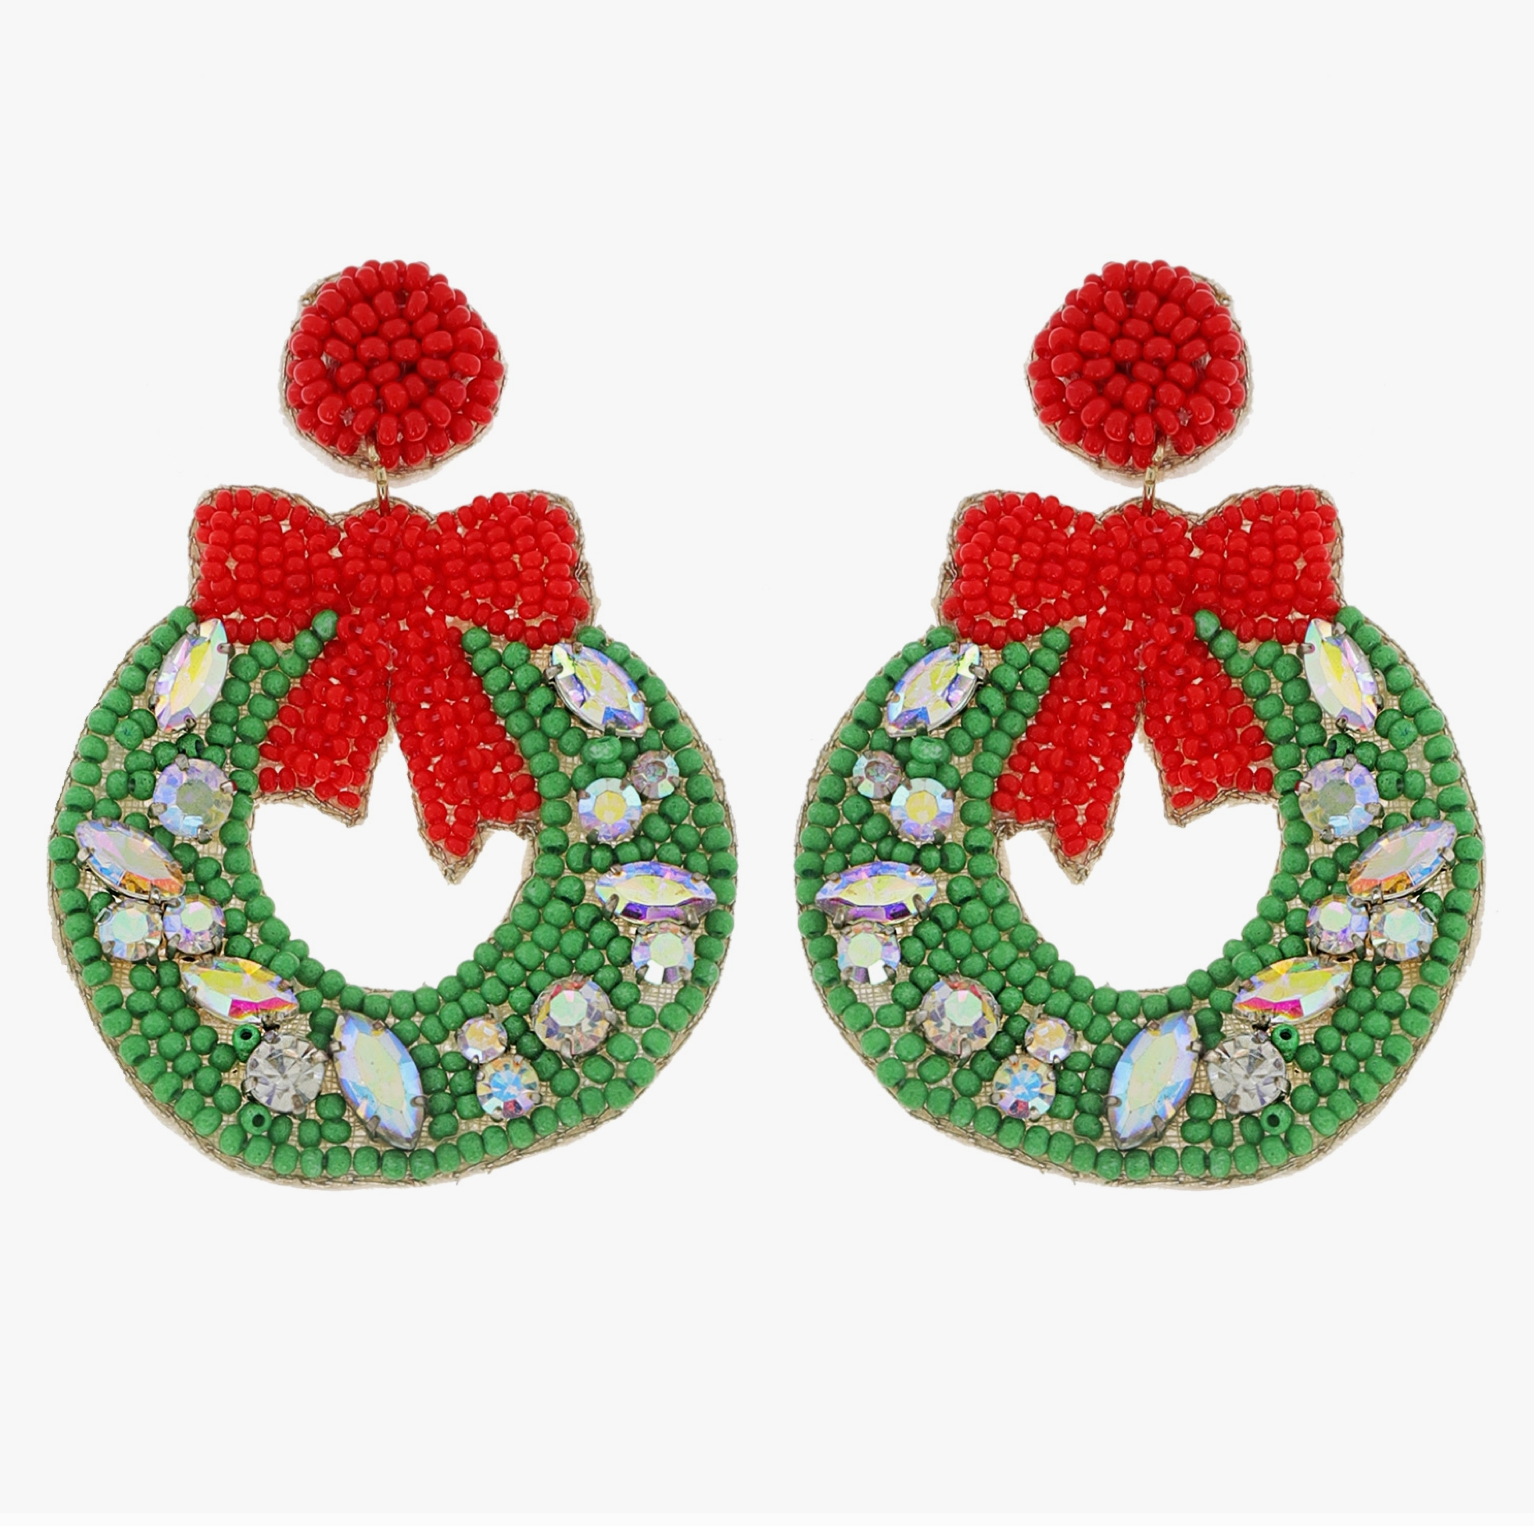 The Canton Christmas Shop Christmas Wreath Beaded Earrings with Red Bow Stocking Stuffer Holiday Gift Party Idea Crystal Rhinestone Jeweled Seed Bead